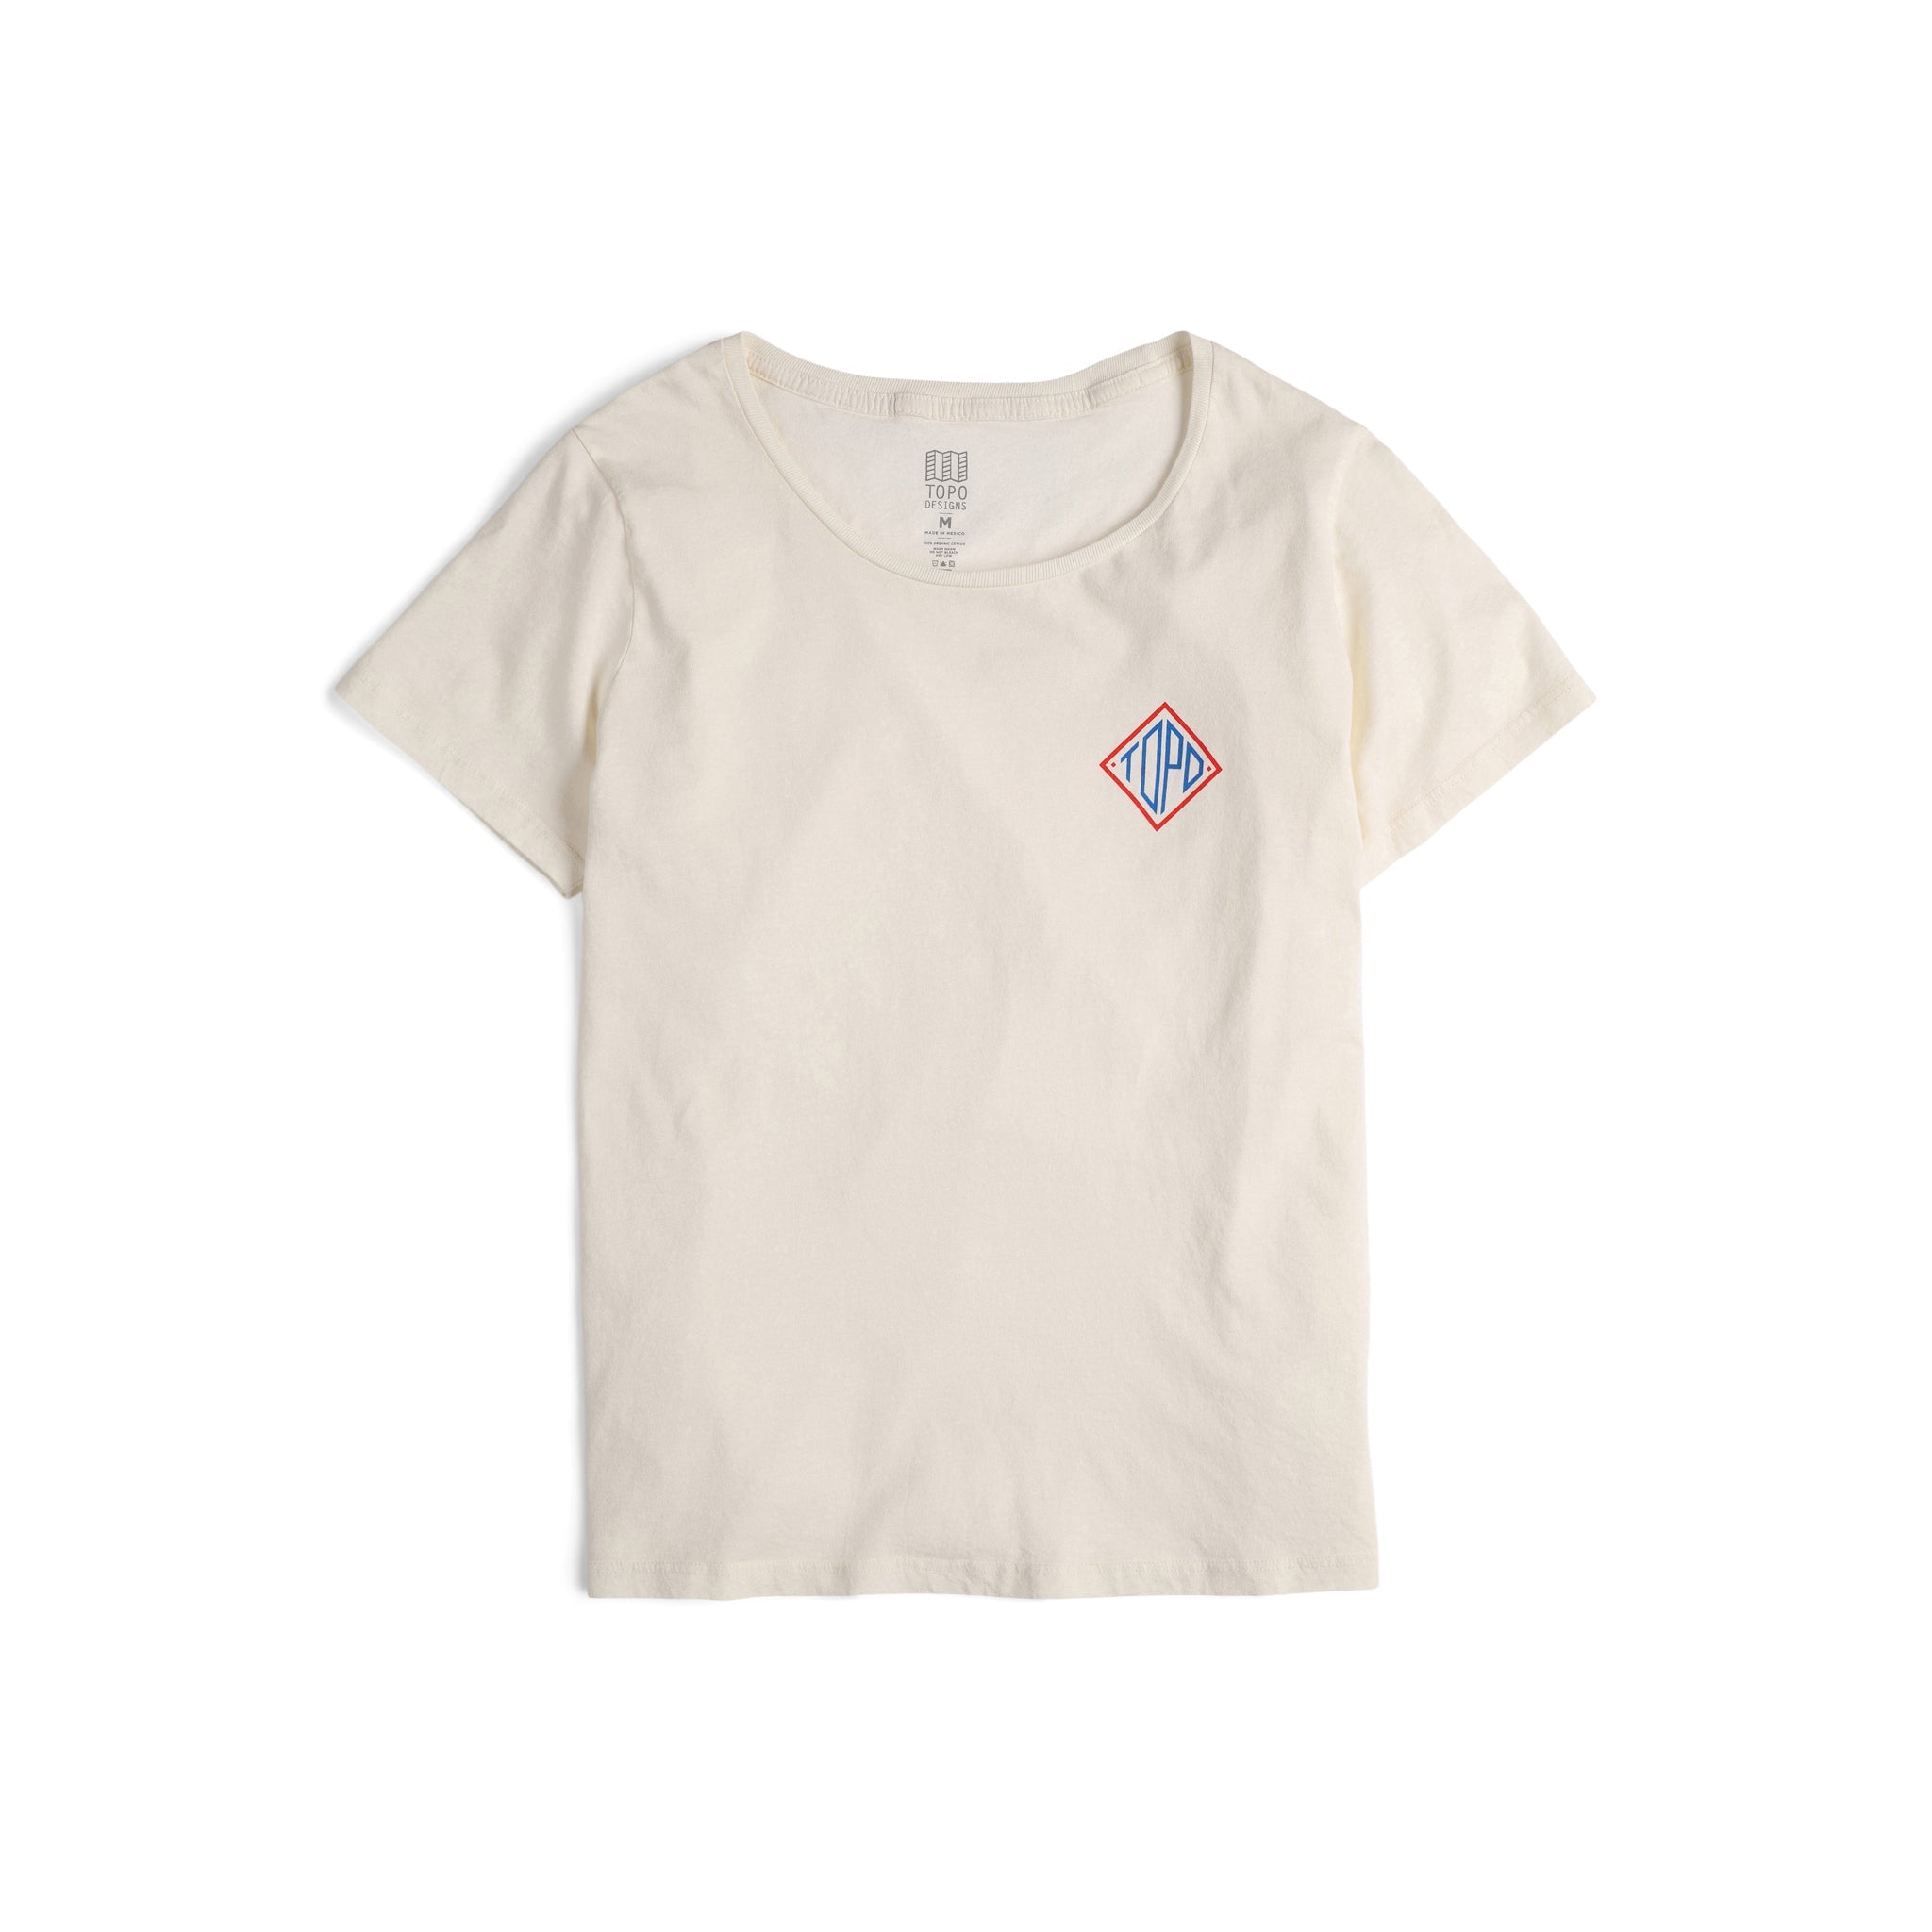 Front view of Topo Designs Women's Small Diamond Tee 100% organic cotton short sleeve graphic logo t-shirt in "natural" white.